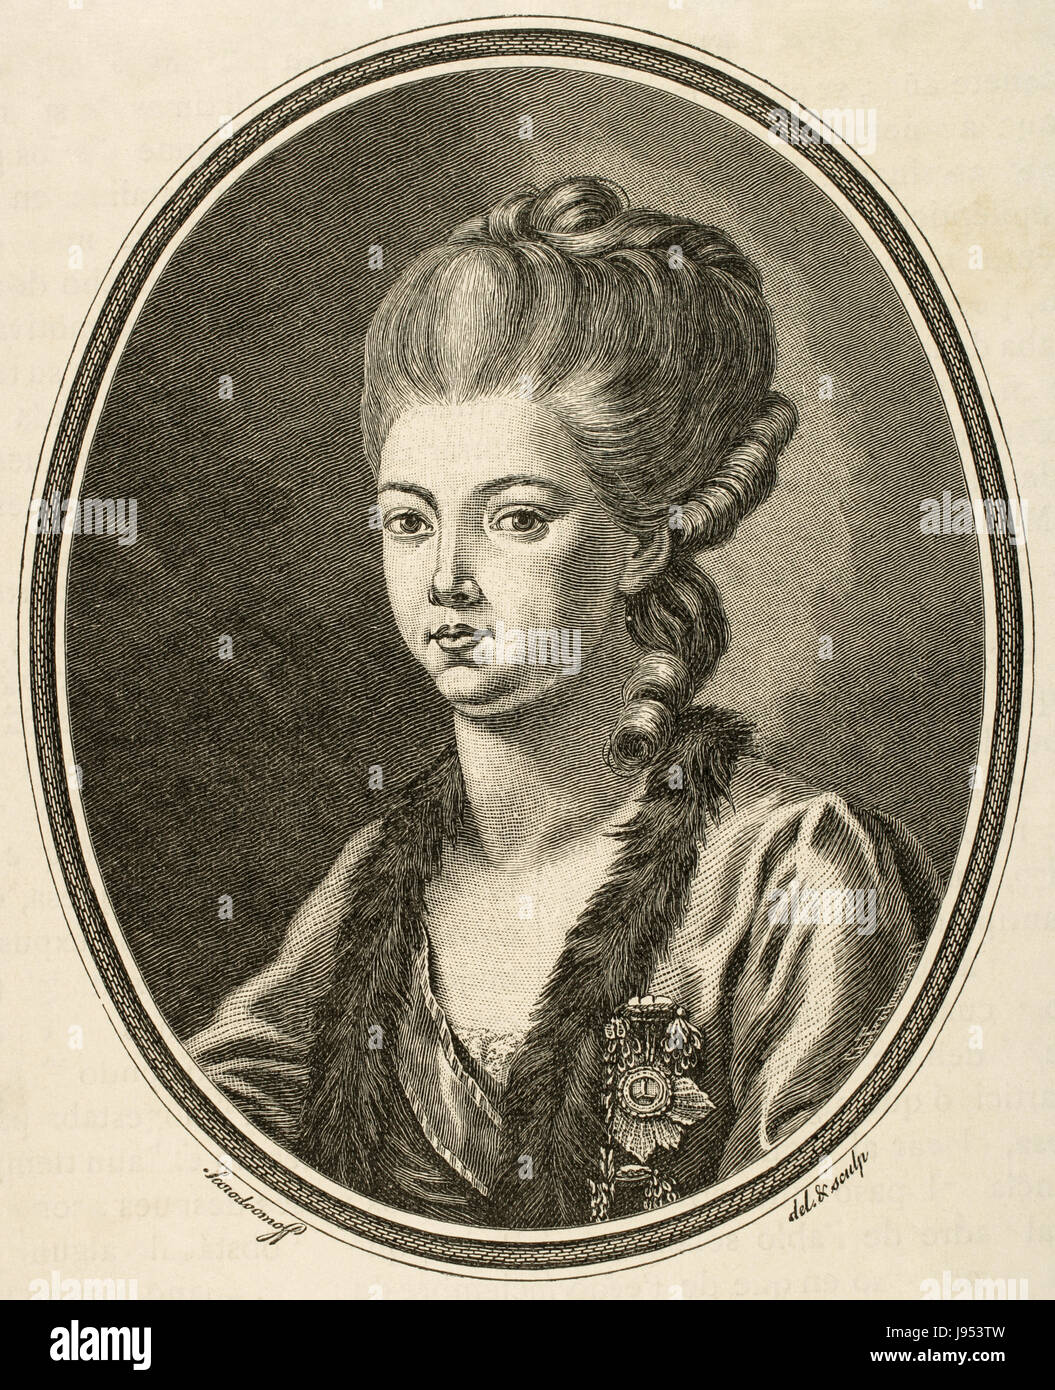 Princess Yekaterina Romanovna Vorontsova-Dashkova (1743-1810). Russian writer and philologist. Friend of Empress Catherine the Great and a major figure of the Russian Enlightenment. Portrait. Engraving by Treibmann. 'Historia Universal', 1895. Stock Photo